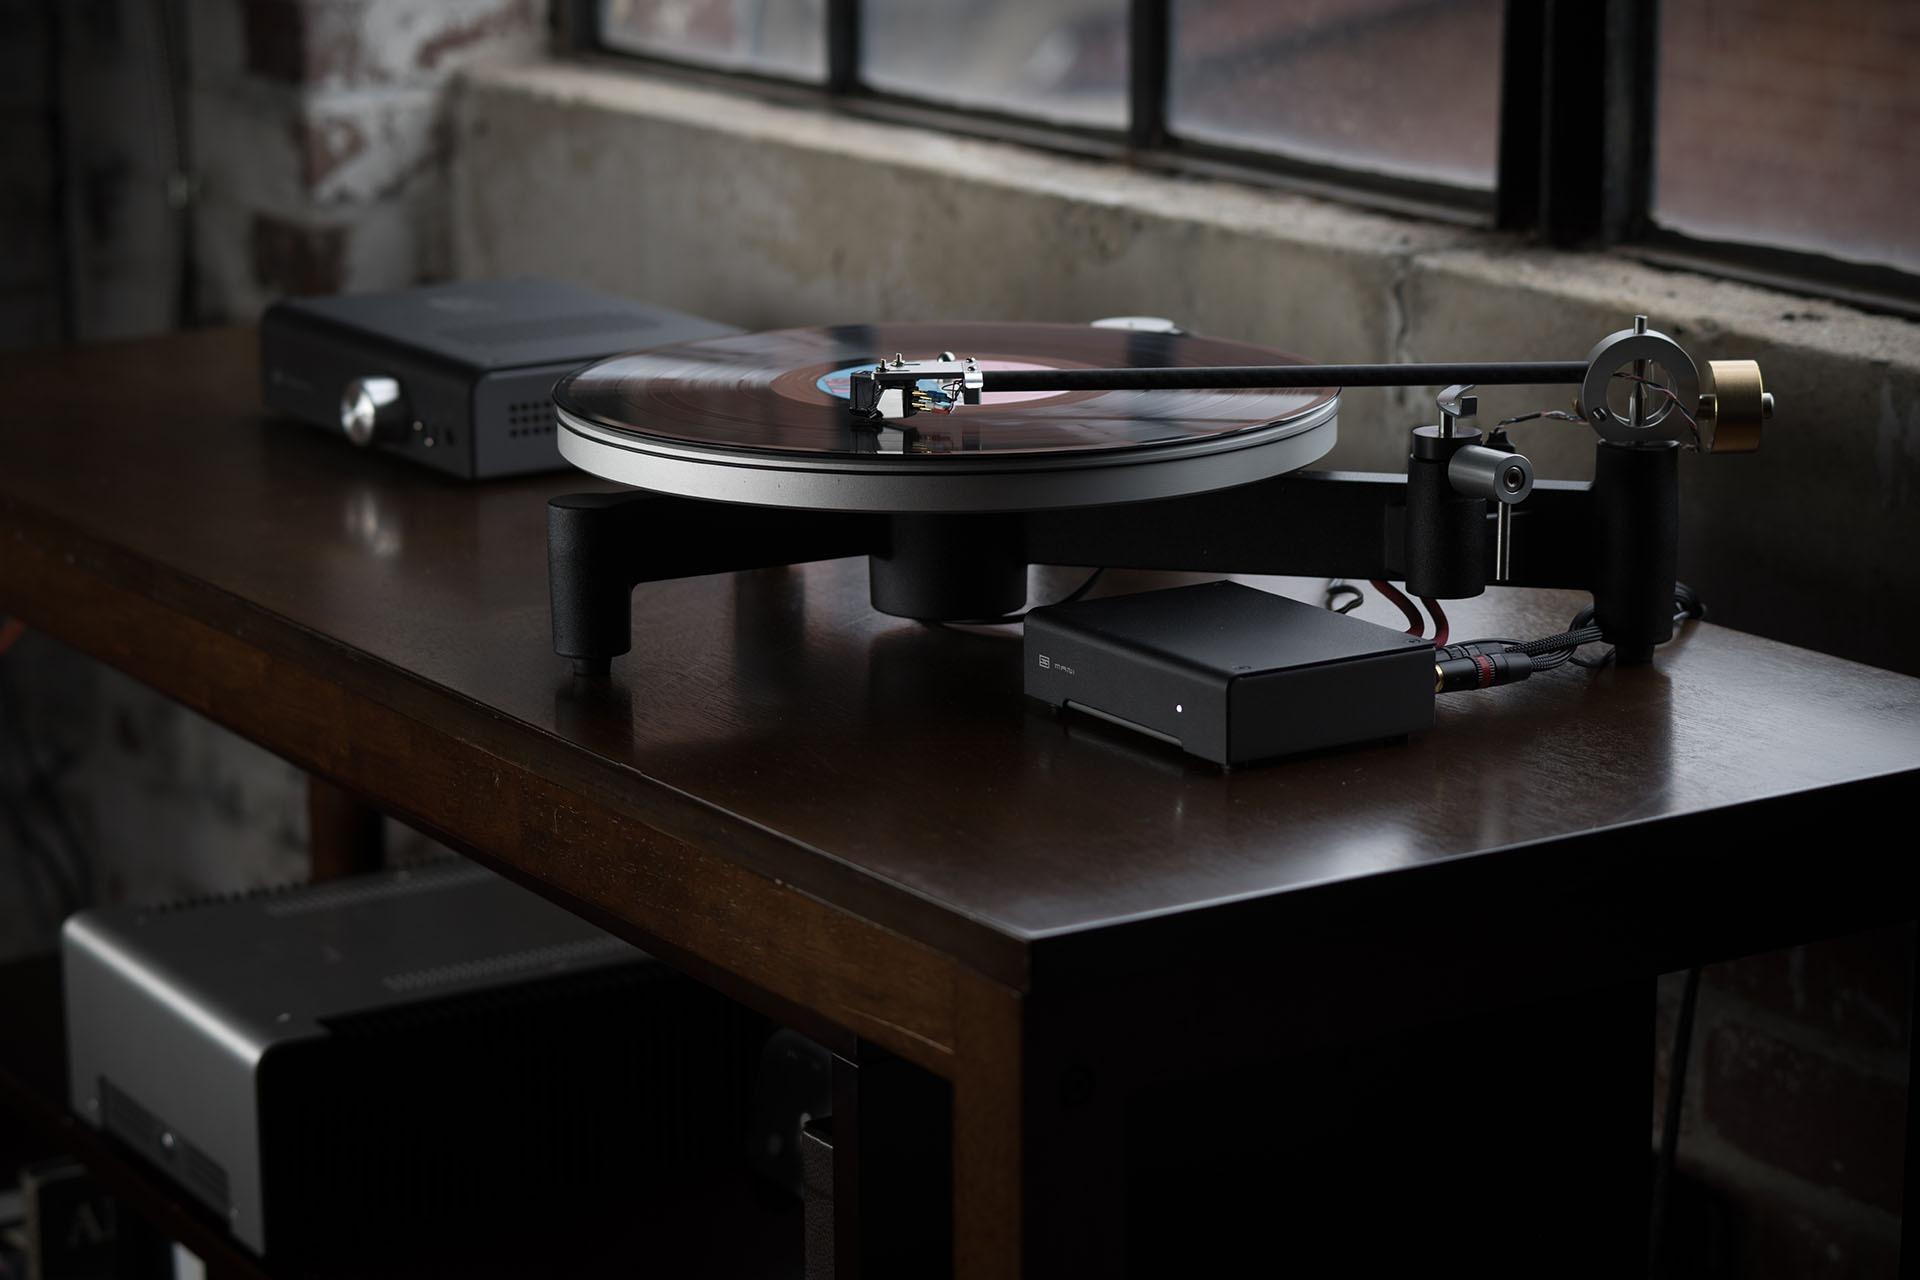 Chris Martens samples Schiit's flagship Sol turntable, with Mani phono preamp and Grado cartridge, and finds unprecedented sophistication and performance for the money. Pro-Ject a7488480 sol insitu 1920